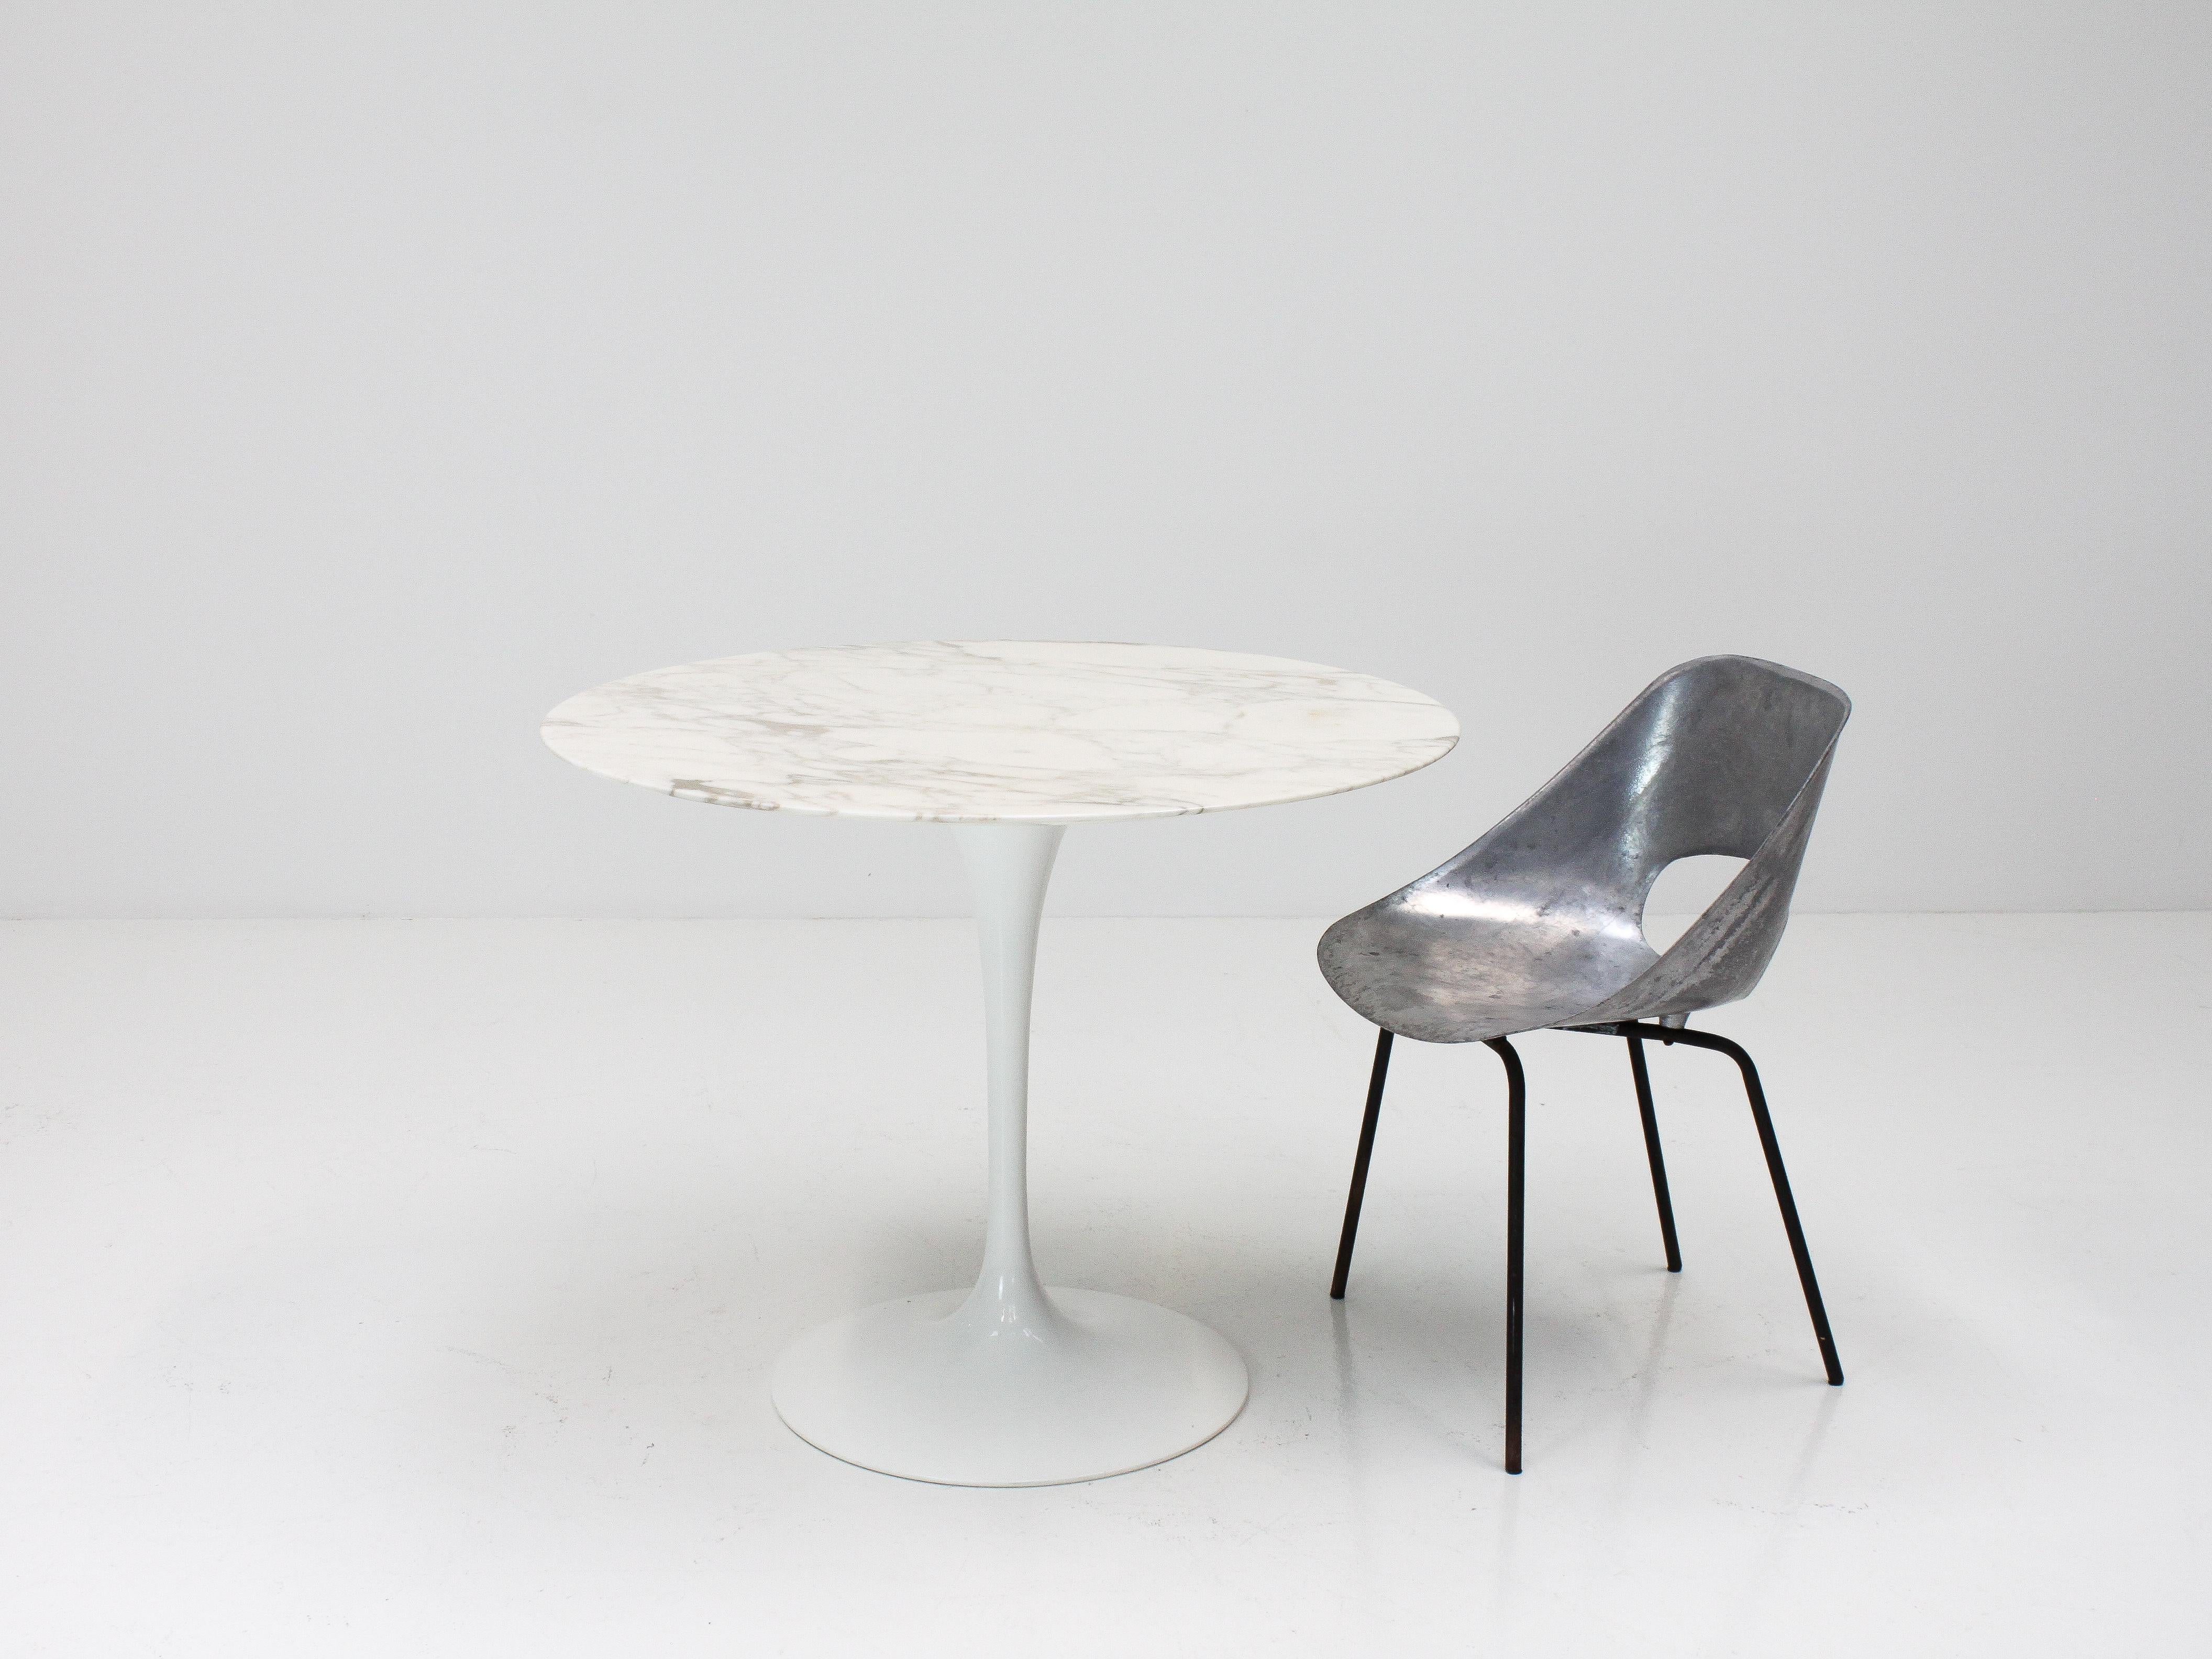 A hugely iconic and famous Eero Saarinen design, the Tulip dining table with its characteristic sculptural single stem with this piece featuring a beautiful veined Italian Calacatta marble tabletop.

In wonderful condition, with only slight signs